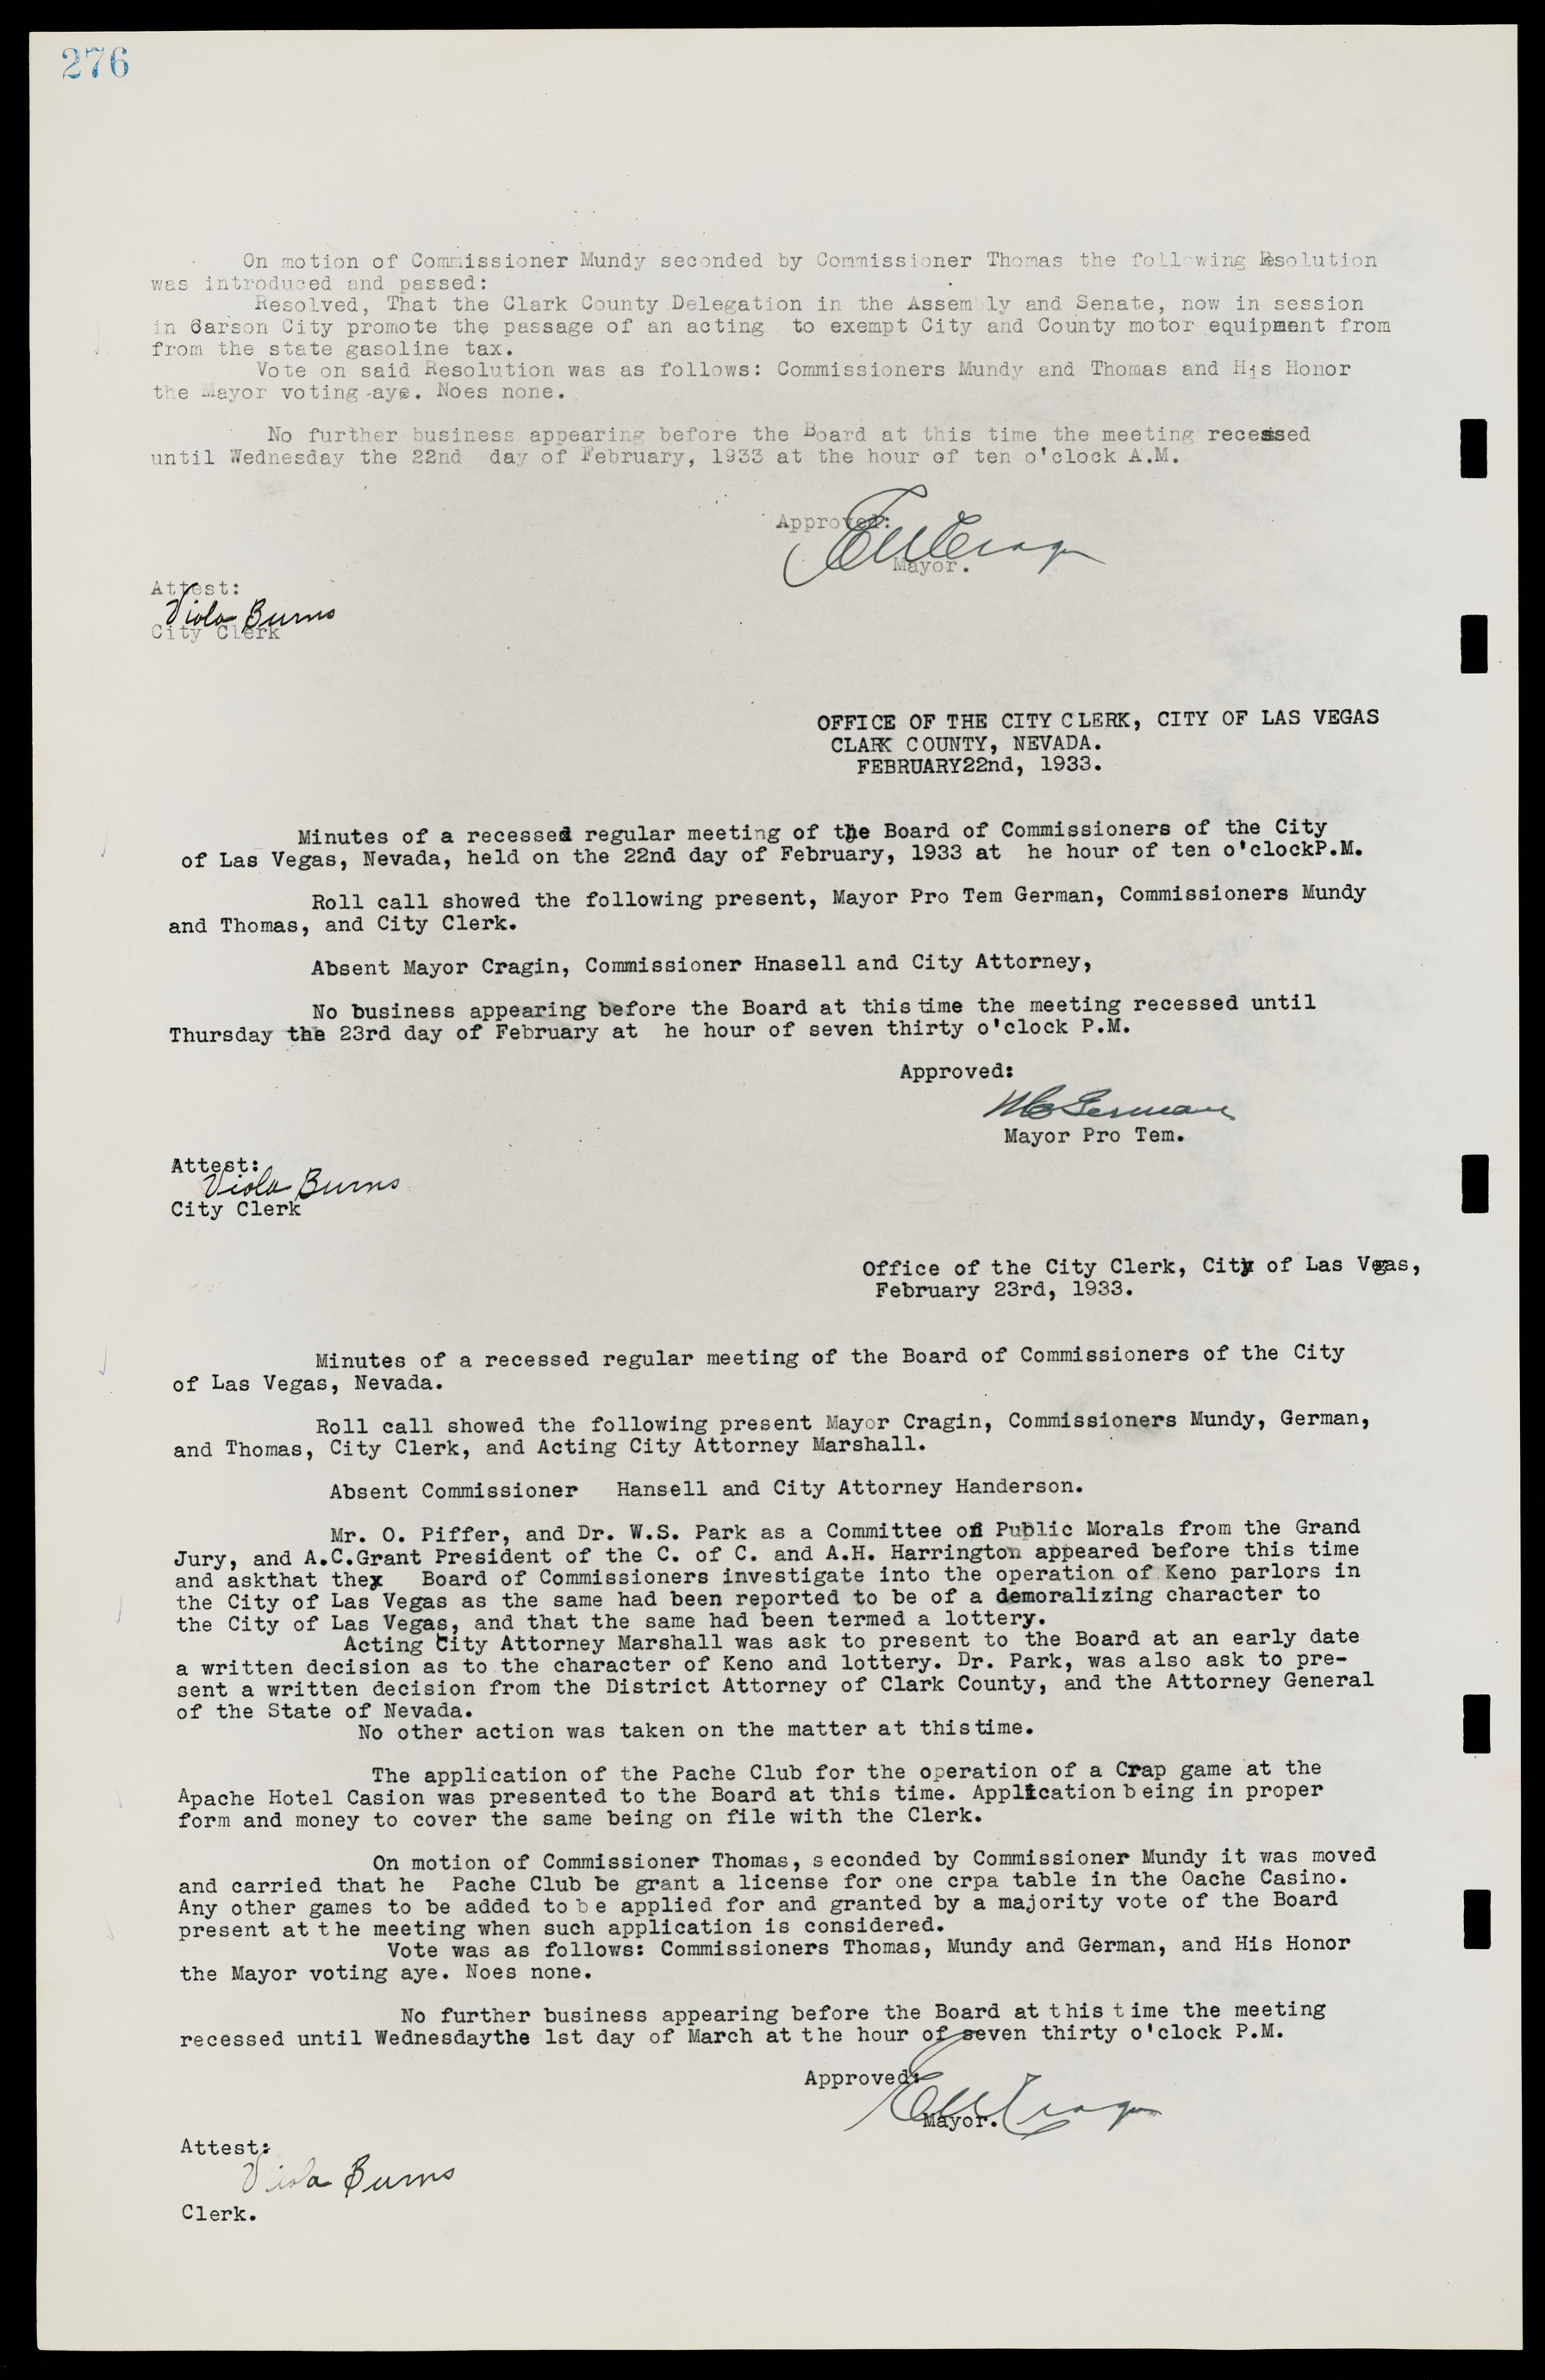 Las Vegas City Commission Minutes, May 14, 1929 to February 11, 1937, lvc000003-282